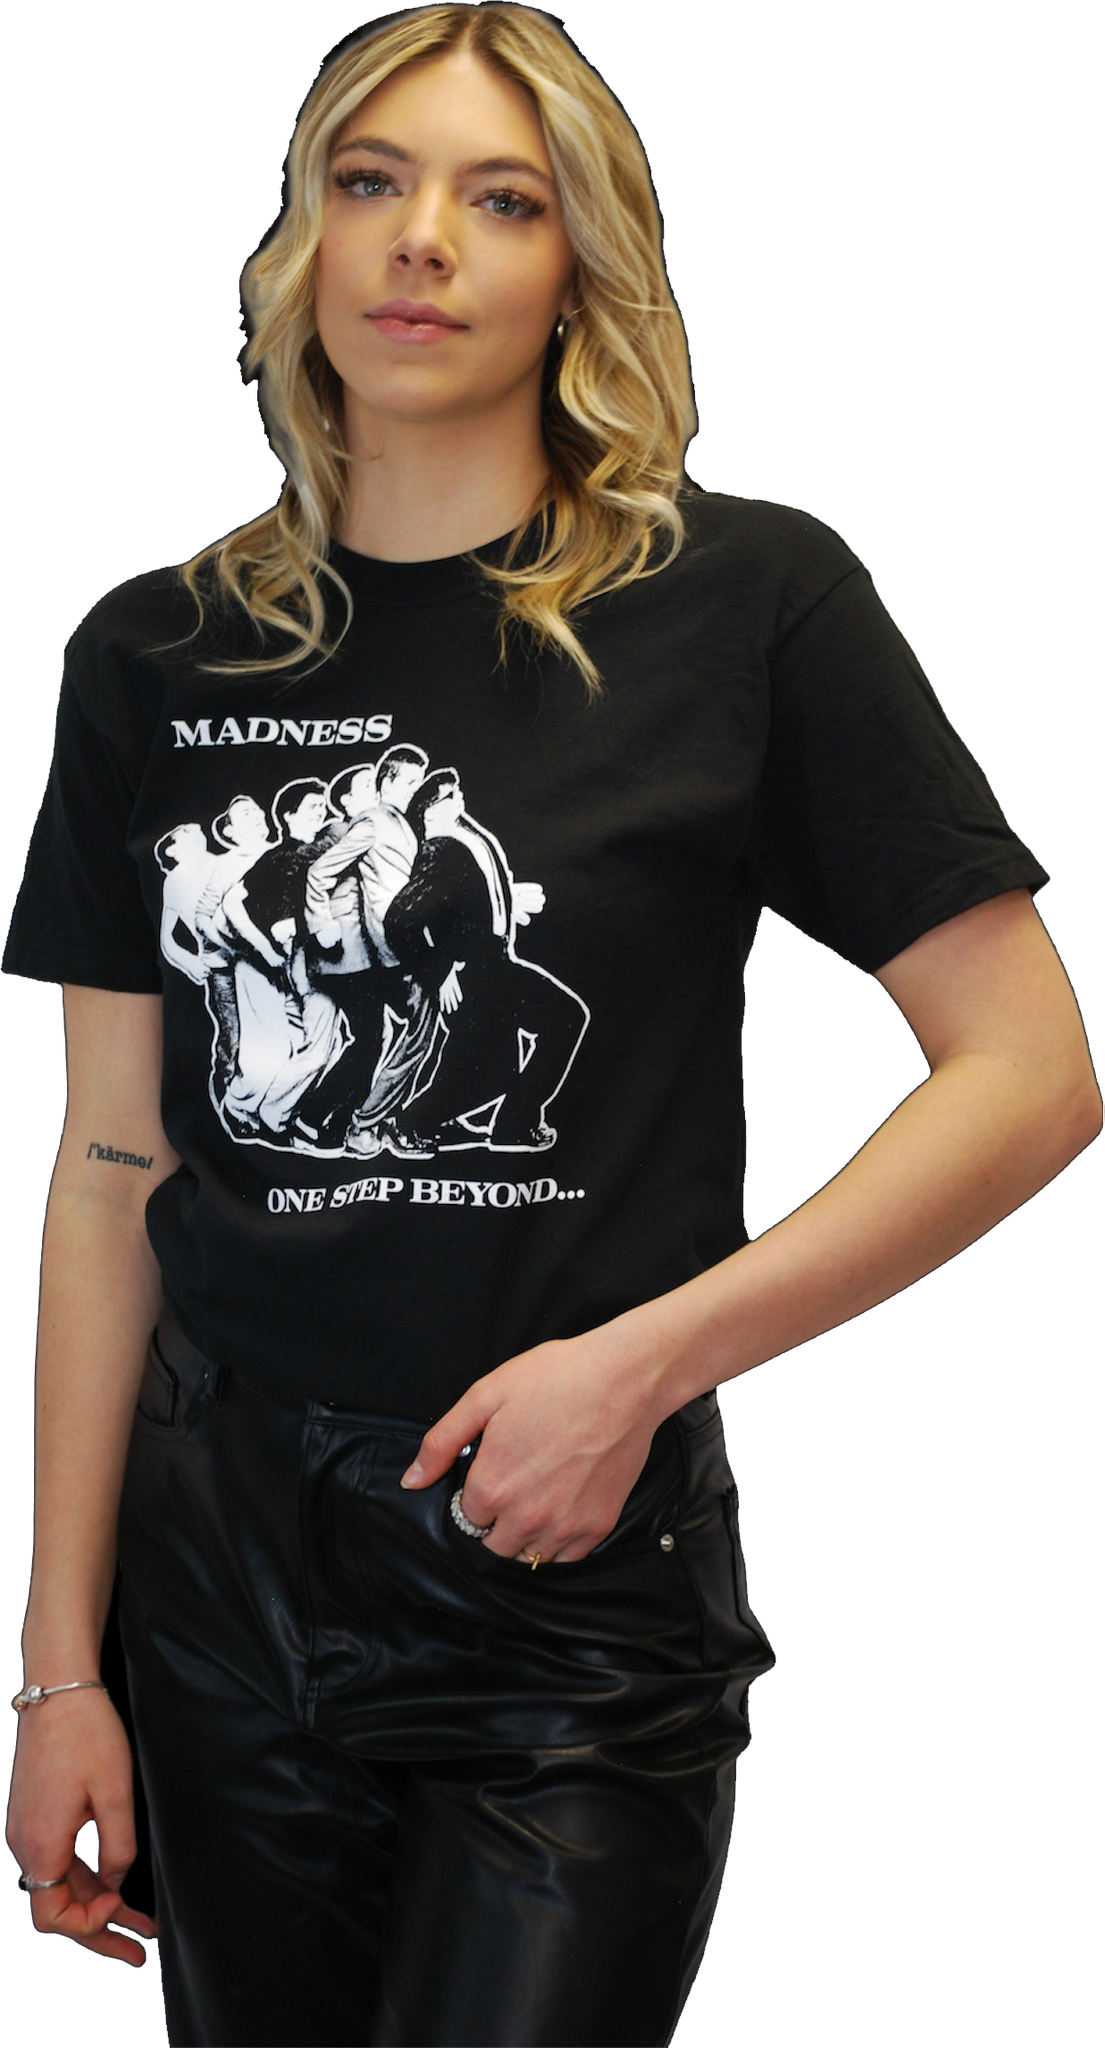 MADNESS "ONE STEP BEYOND" T-SHIRT